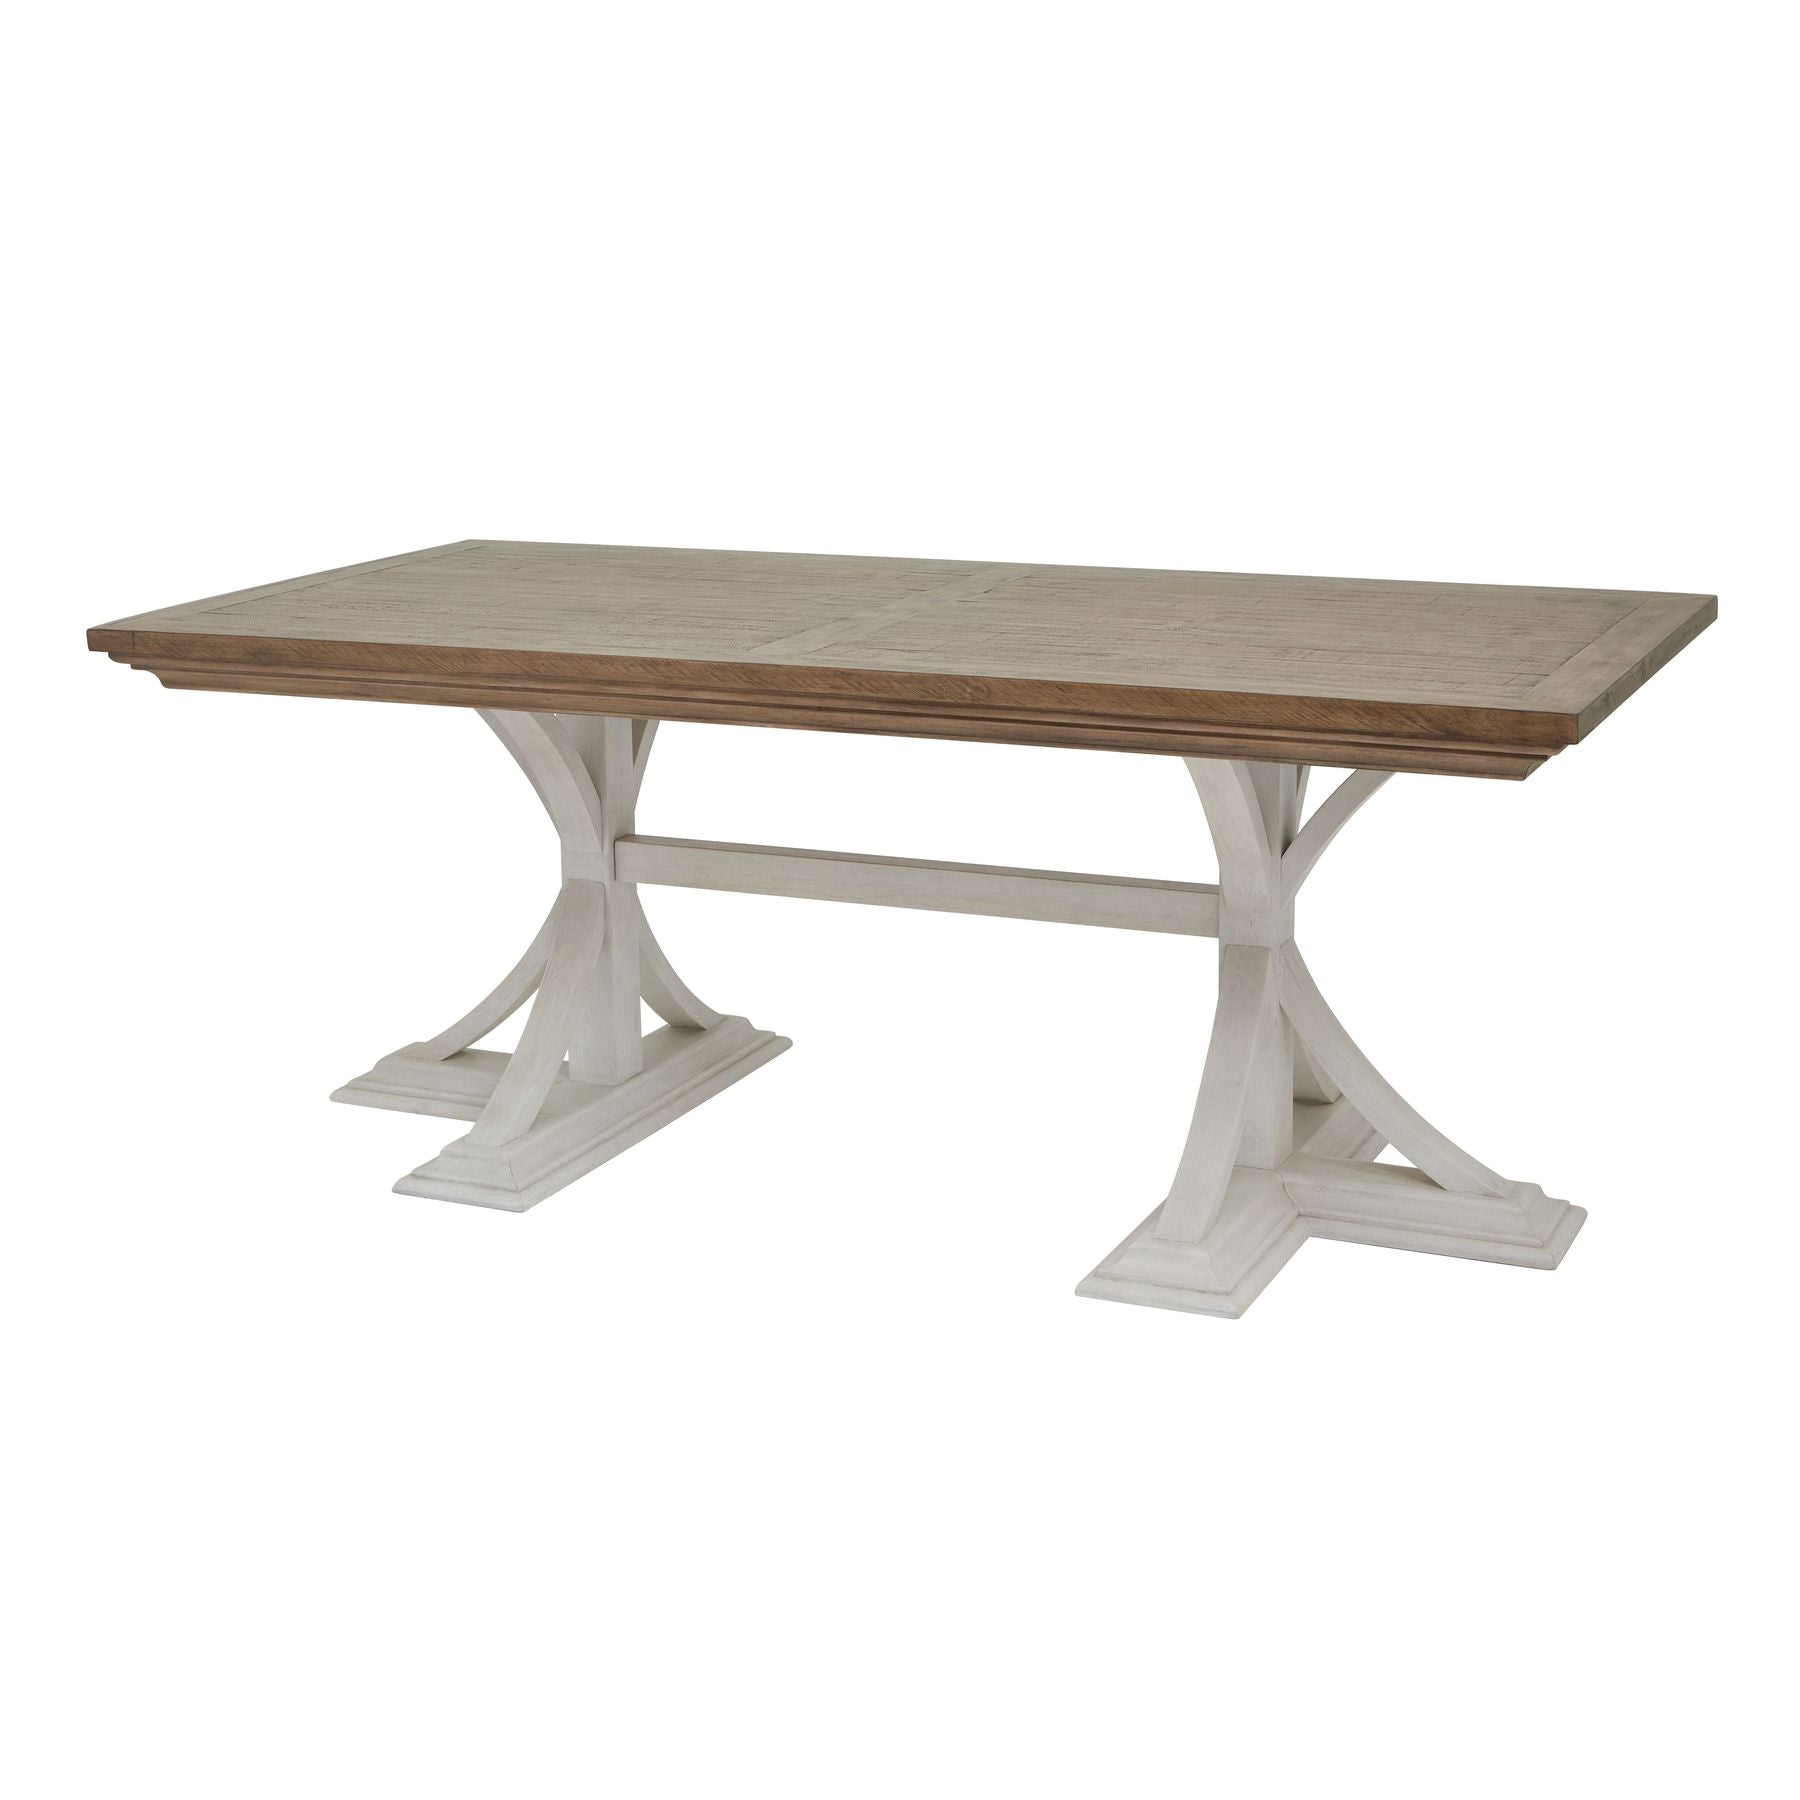 View Luna Collection Rectangular Dining Table information